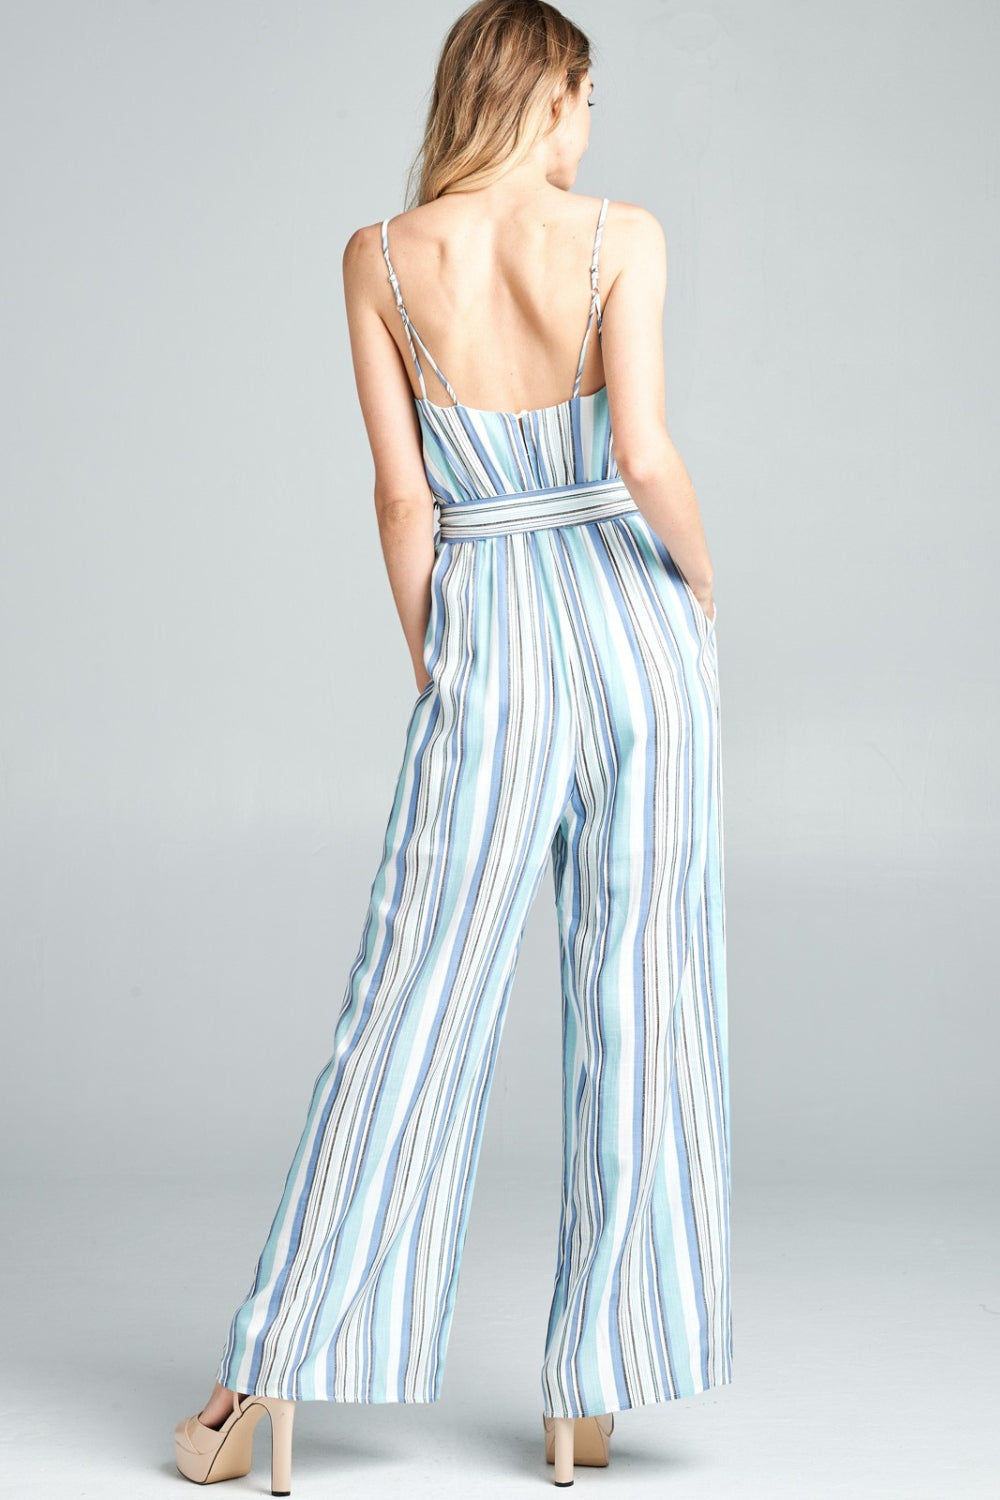 Cotton Bleu by Nu Label Tie Front Striped Sleeveless Jumpsuit-Jumpsuits & Rompers-Inspired by Justeen-Women's Clothing Boutique in Chicago, Illinois